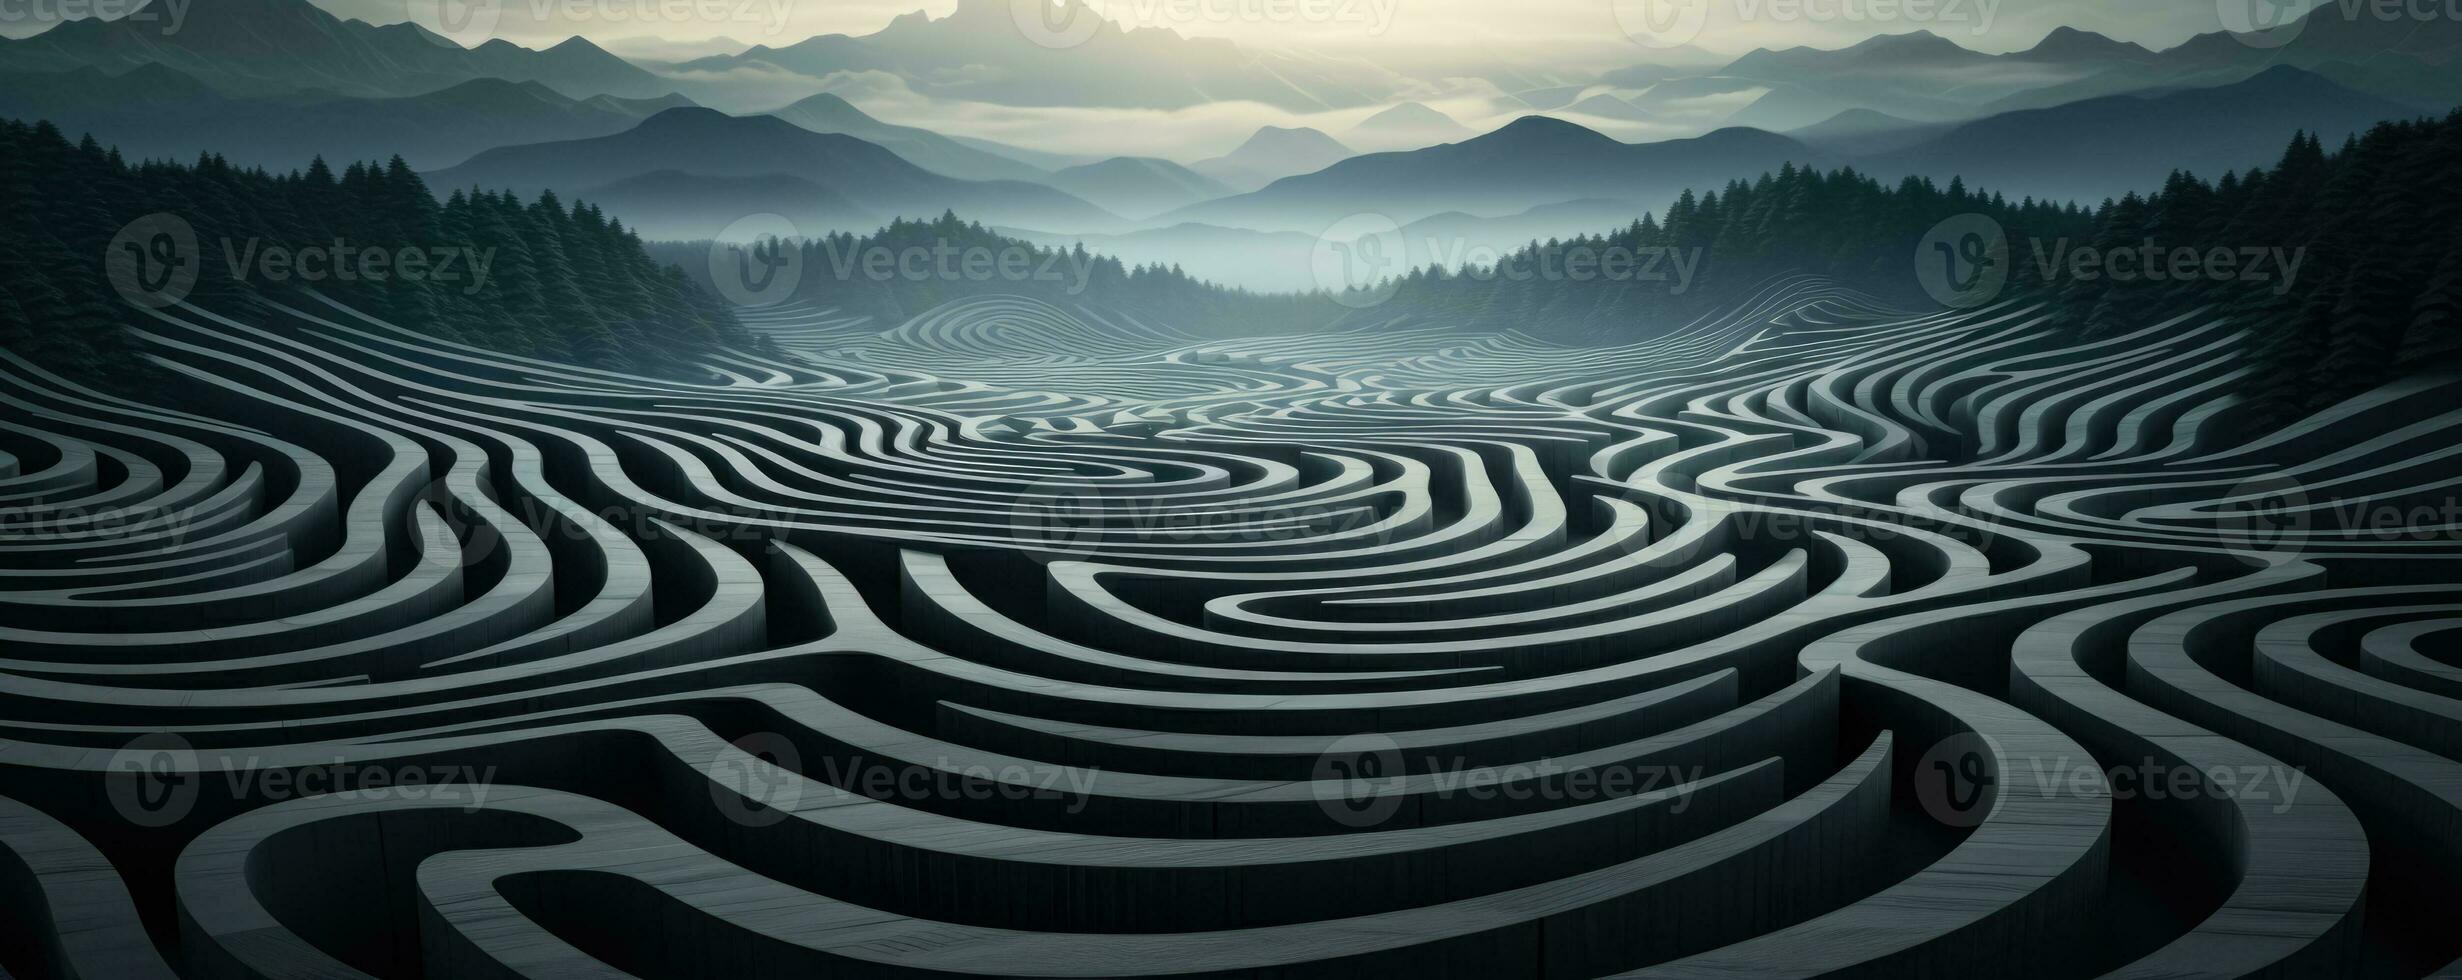 Twisted grid patterns creating a visually challenging optical illusion landscape photo